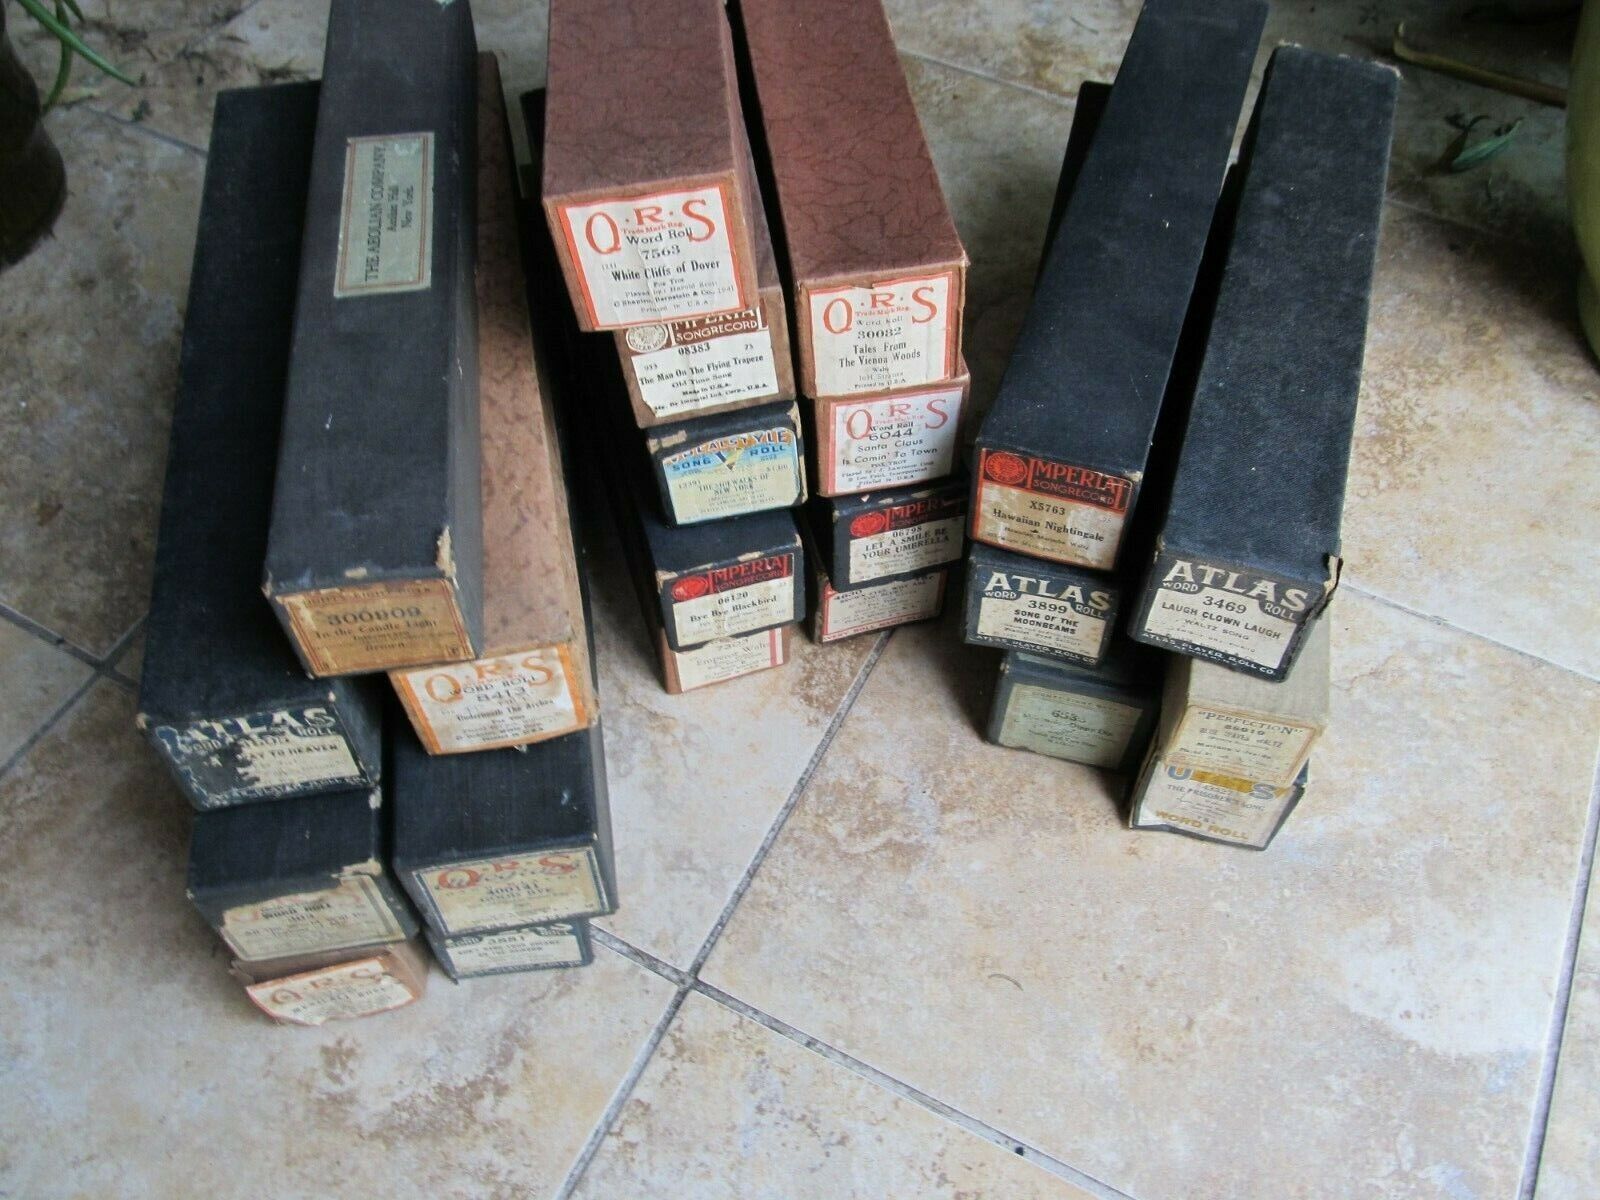 LG Lot, 20 PLAYER PIANO ROLLS, ALL WWII Popular Classic Patriotic Military Songs